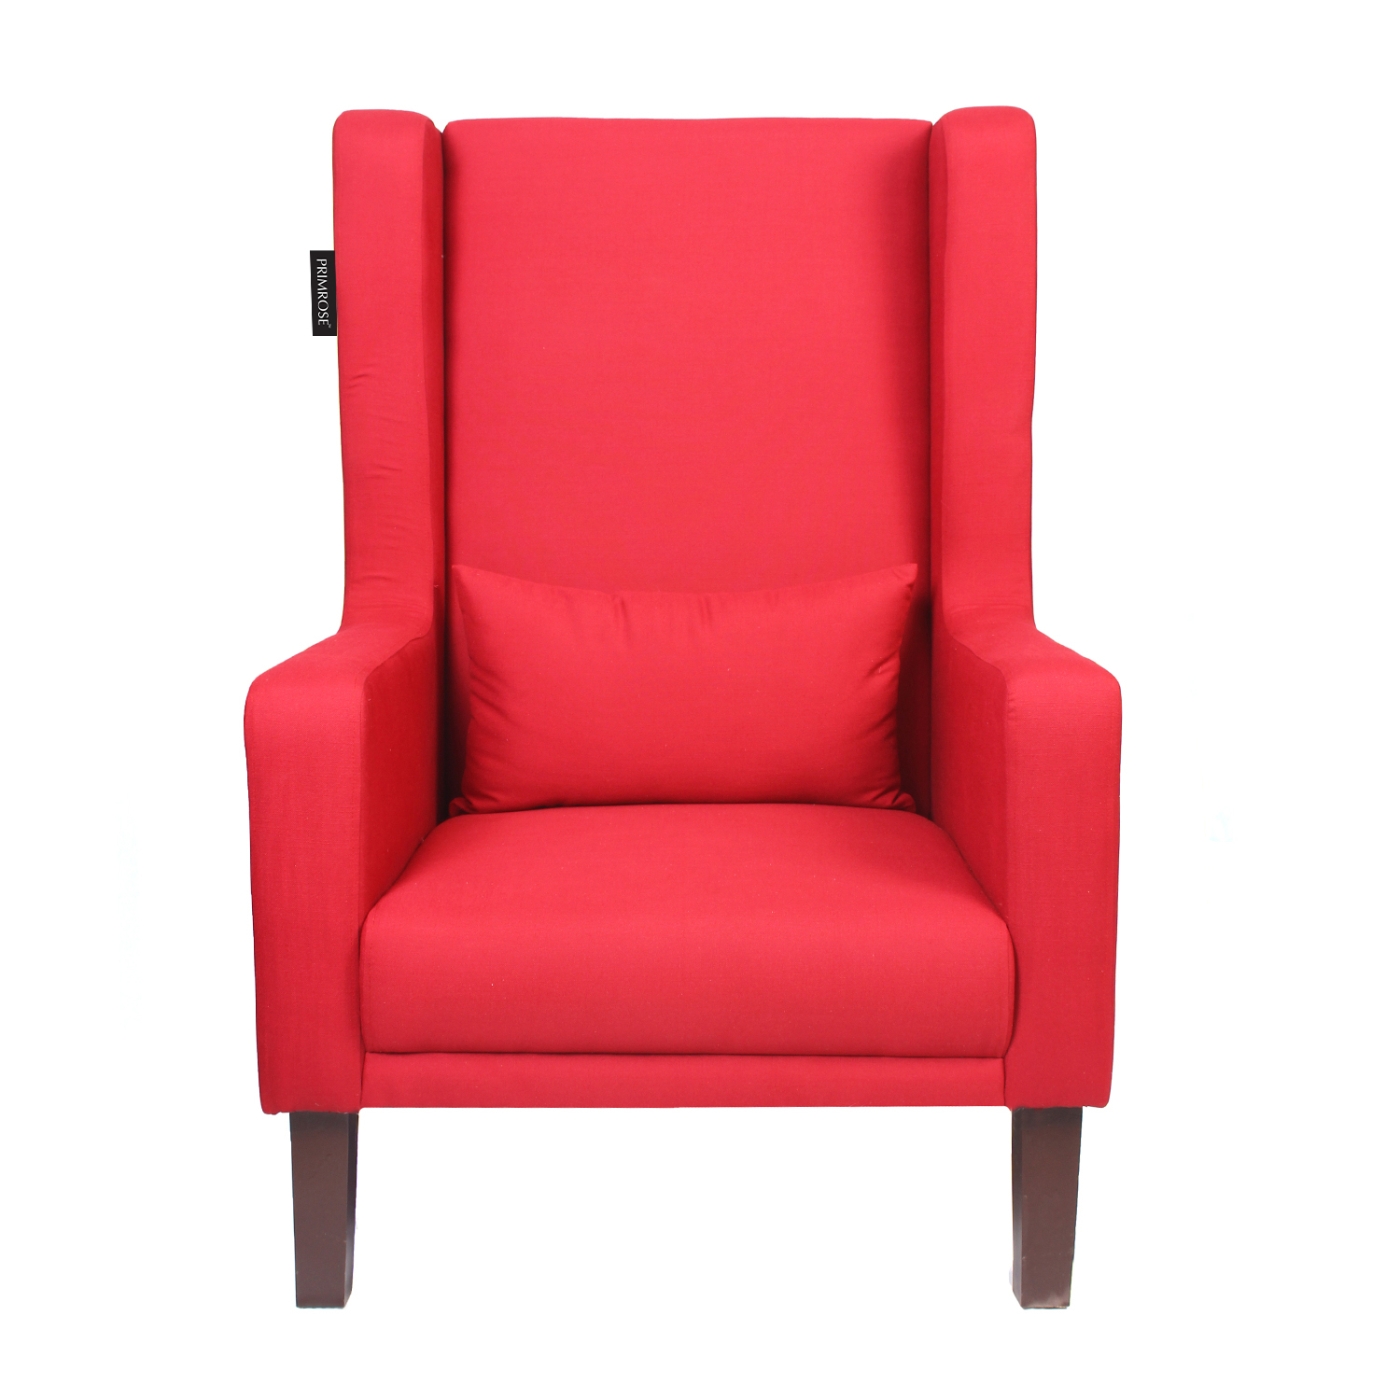 PRIMROSE Chicago High Back Faux Lenin Fabric Chair - Red  